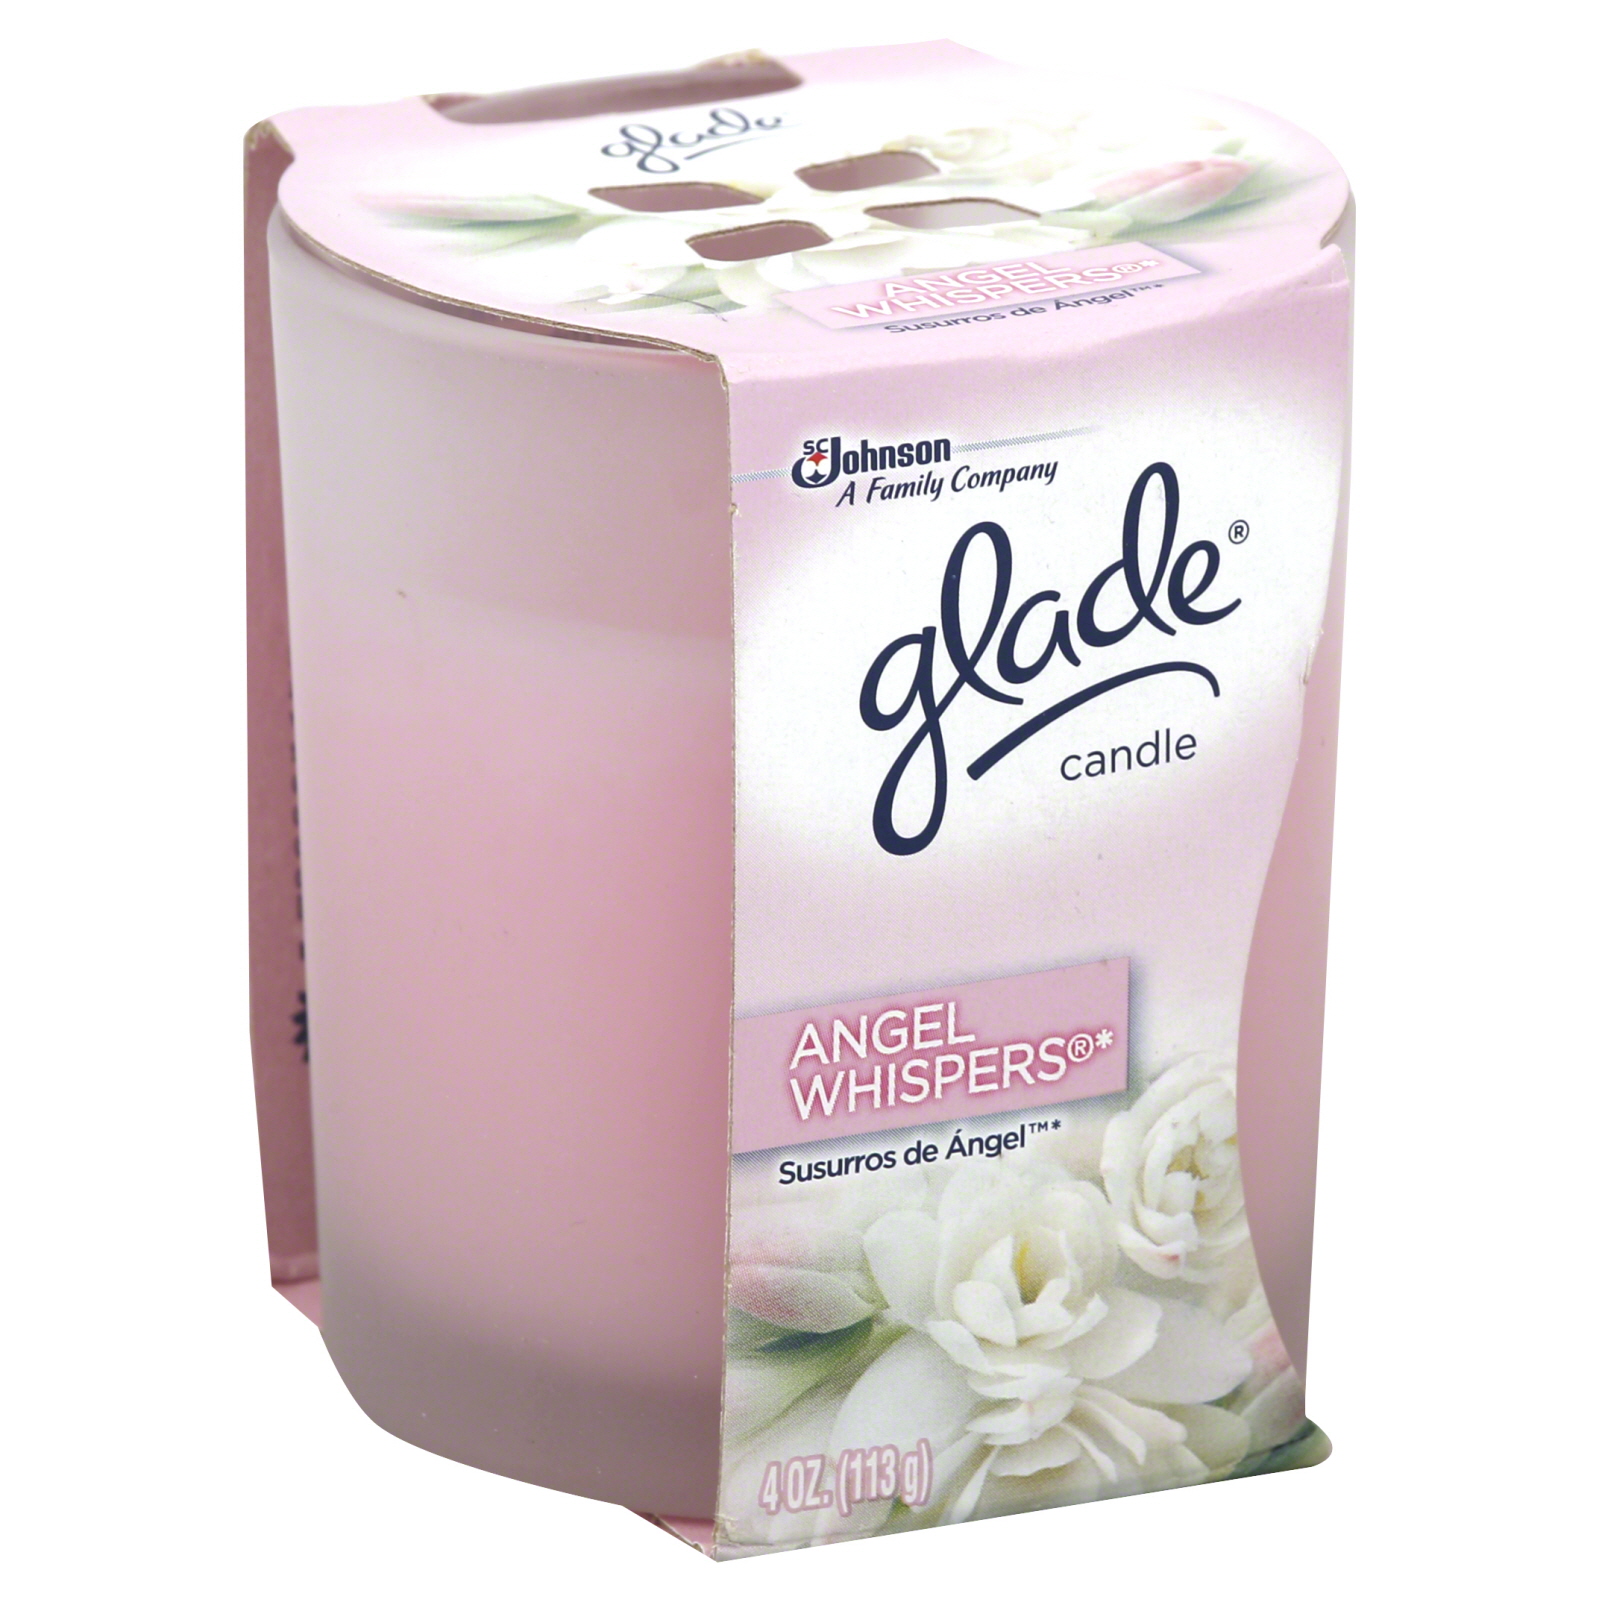 Glade Candle, Angel Whispers, 4 oz (113 g)